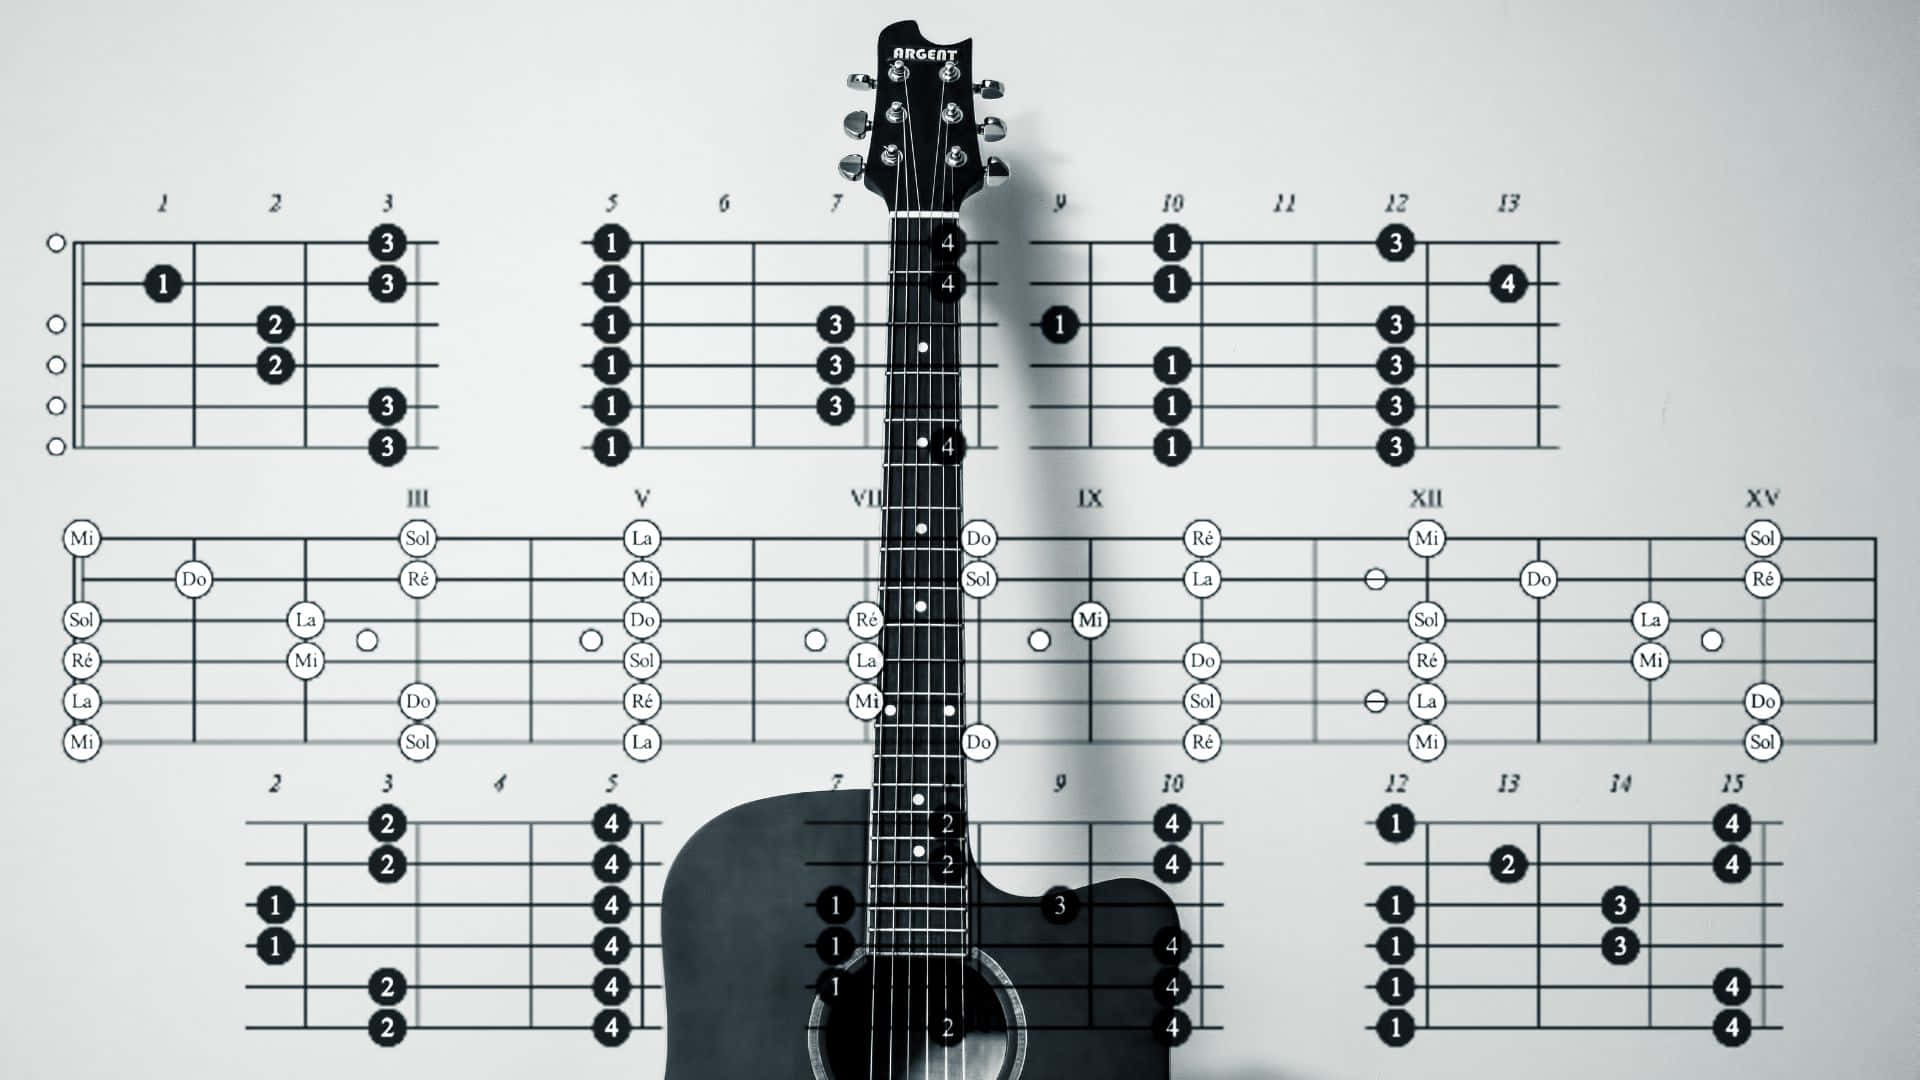 Monochrome Majesty - A Stunning Guitar in Black and White Wallpaper